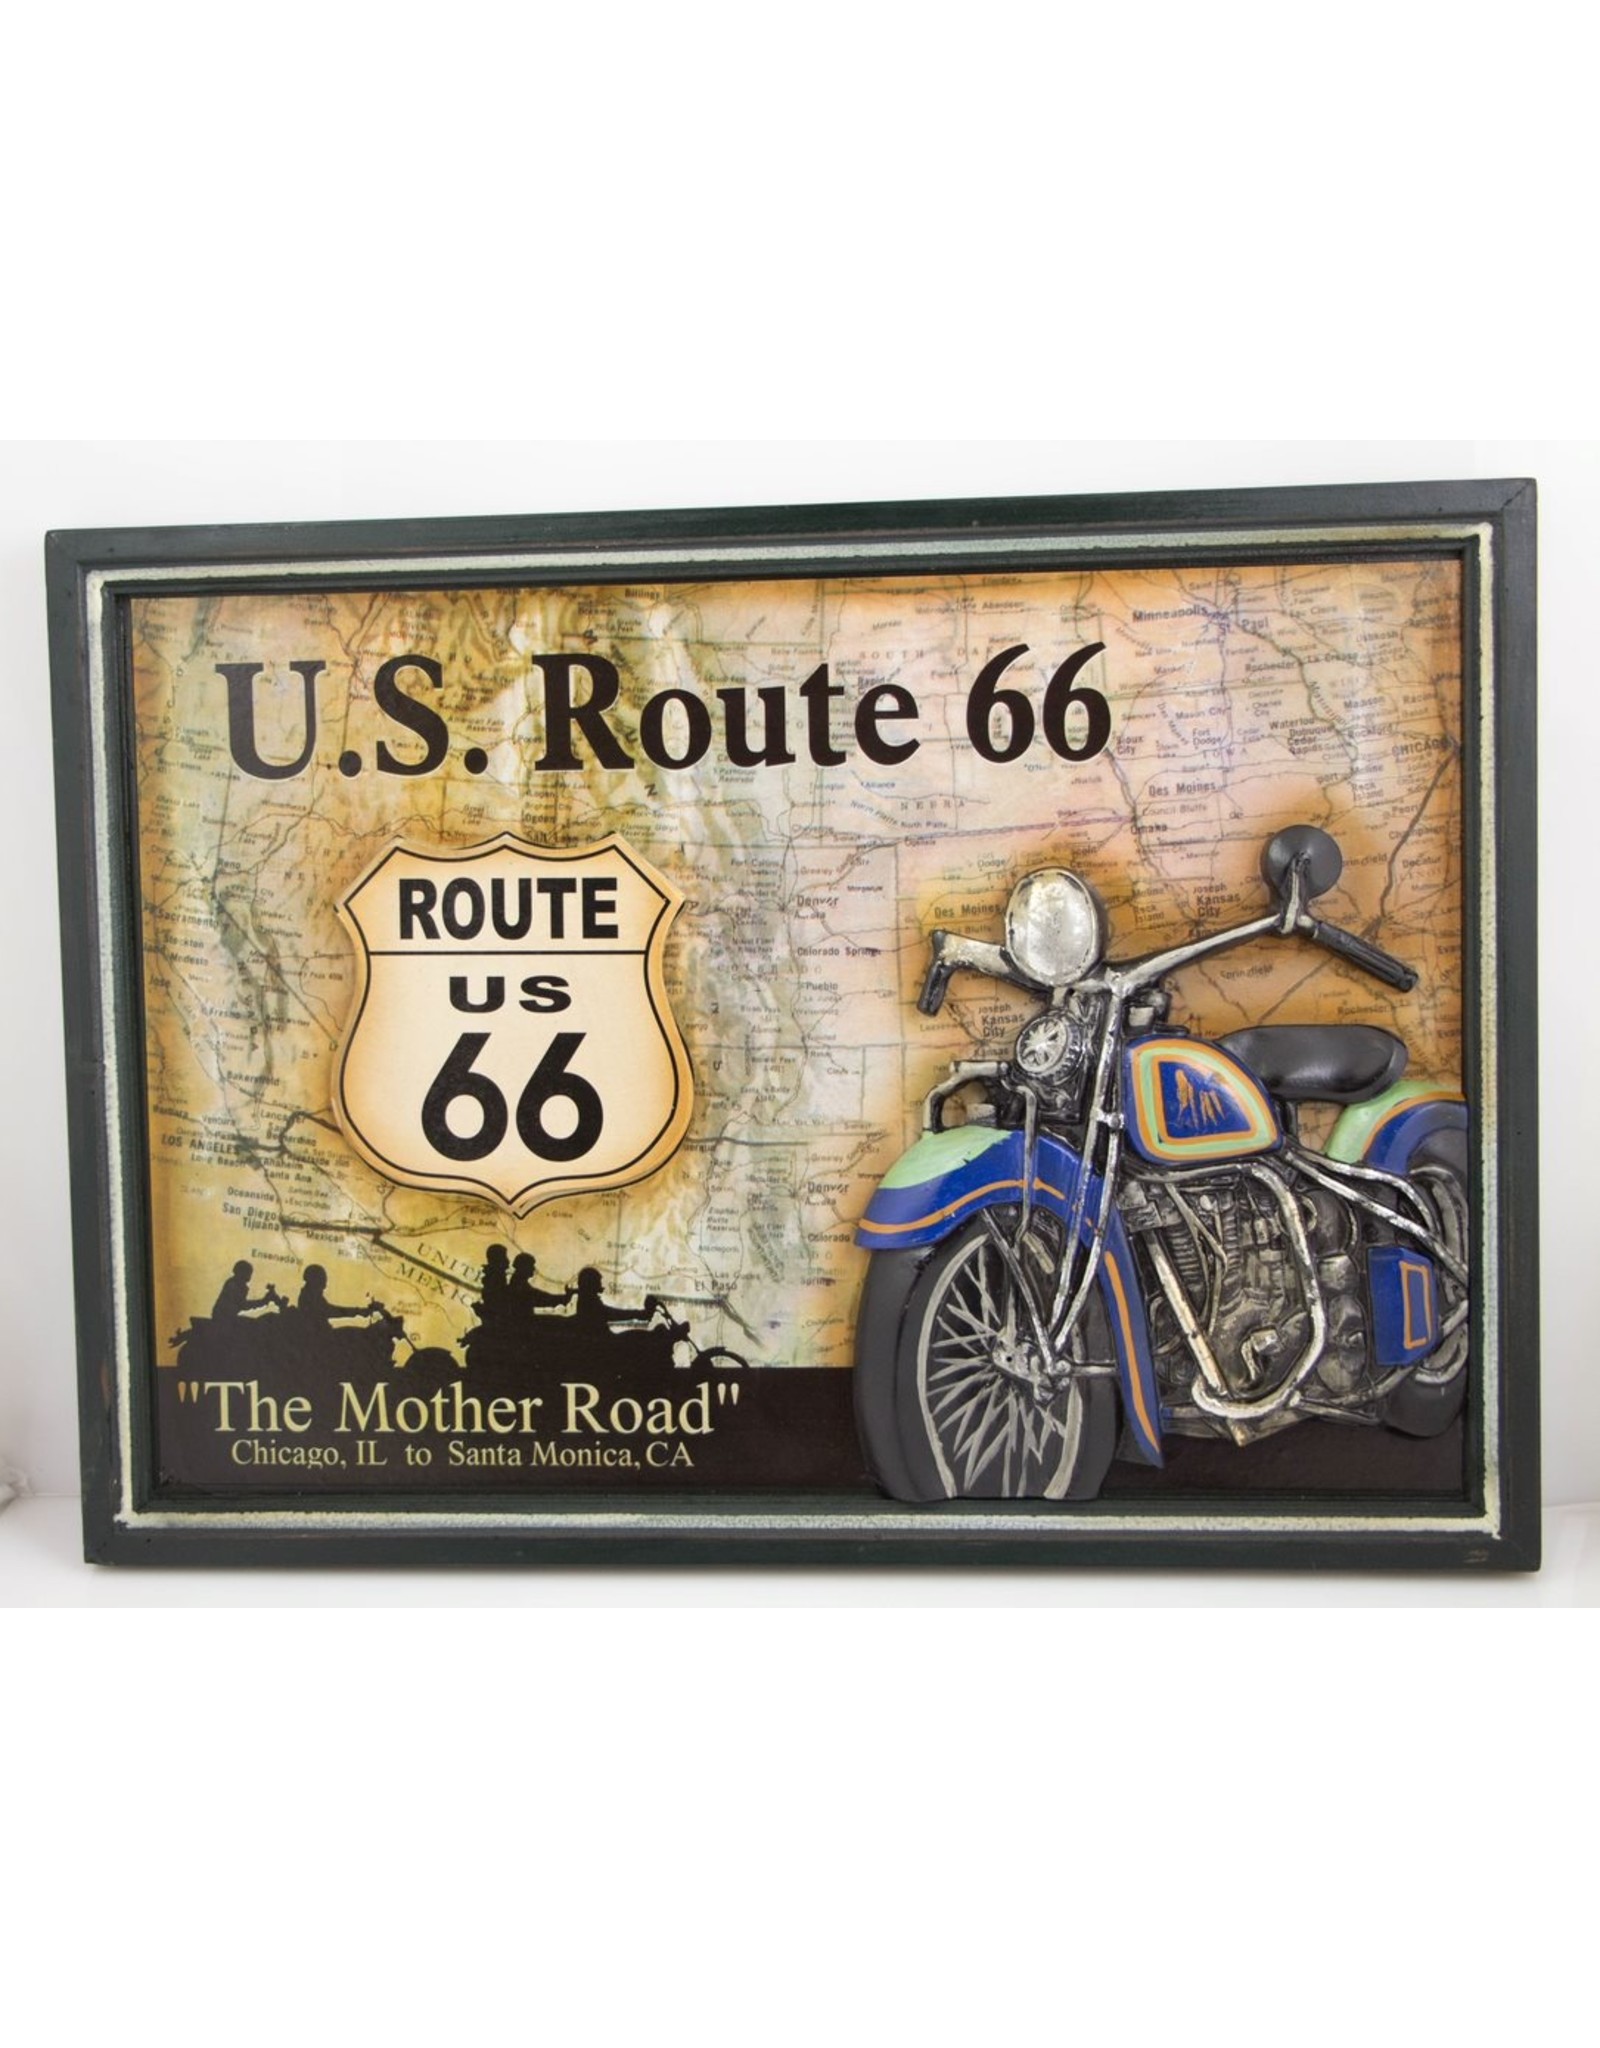 US route 66